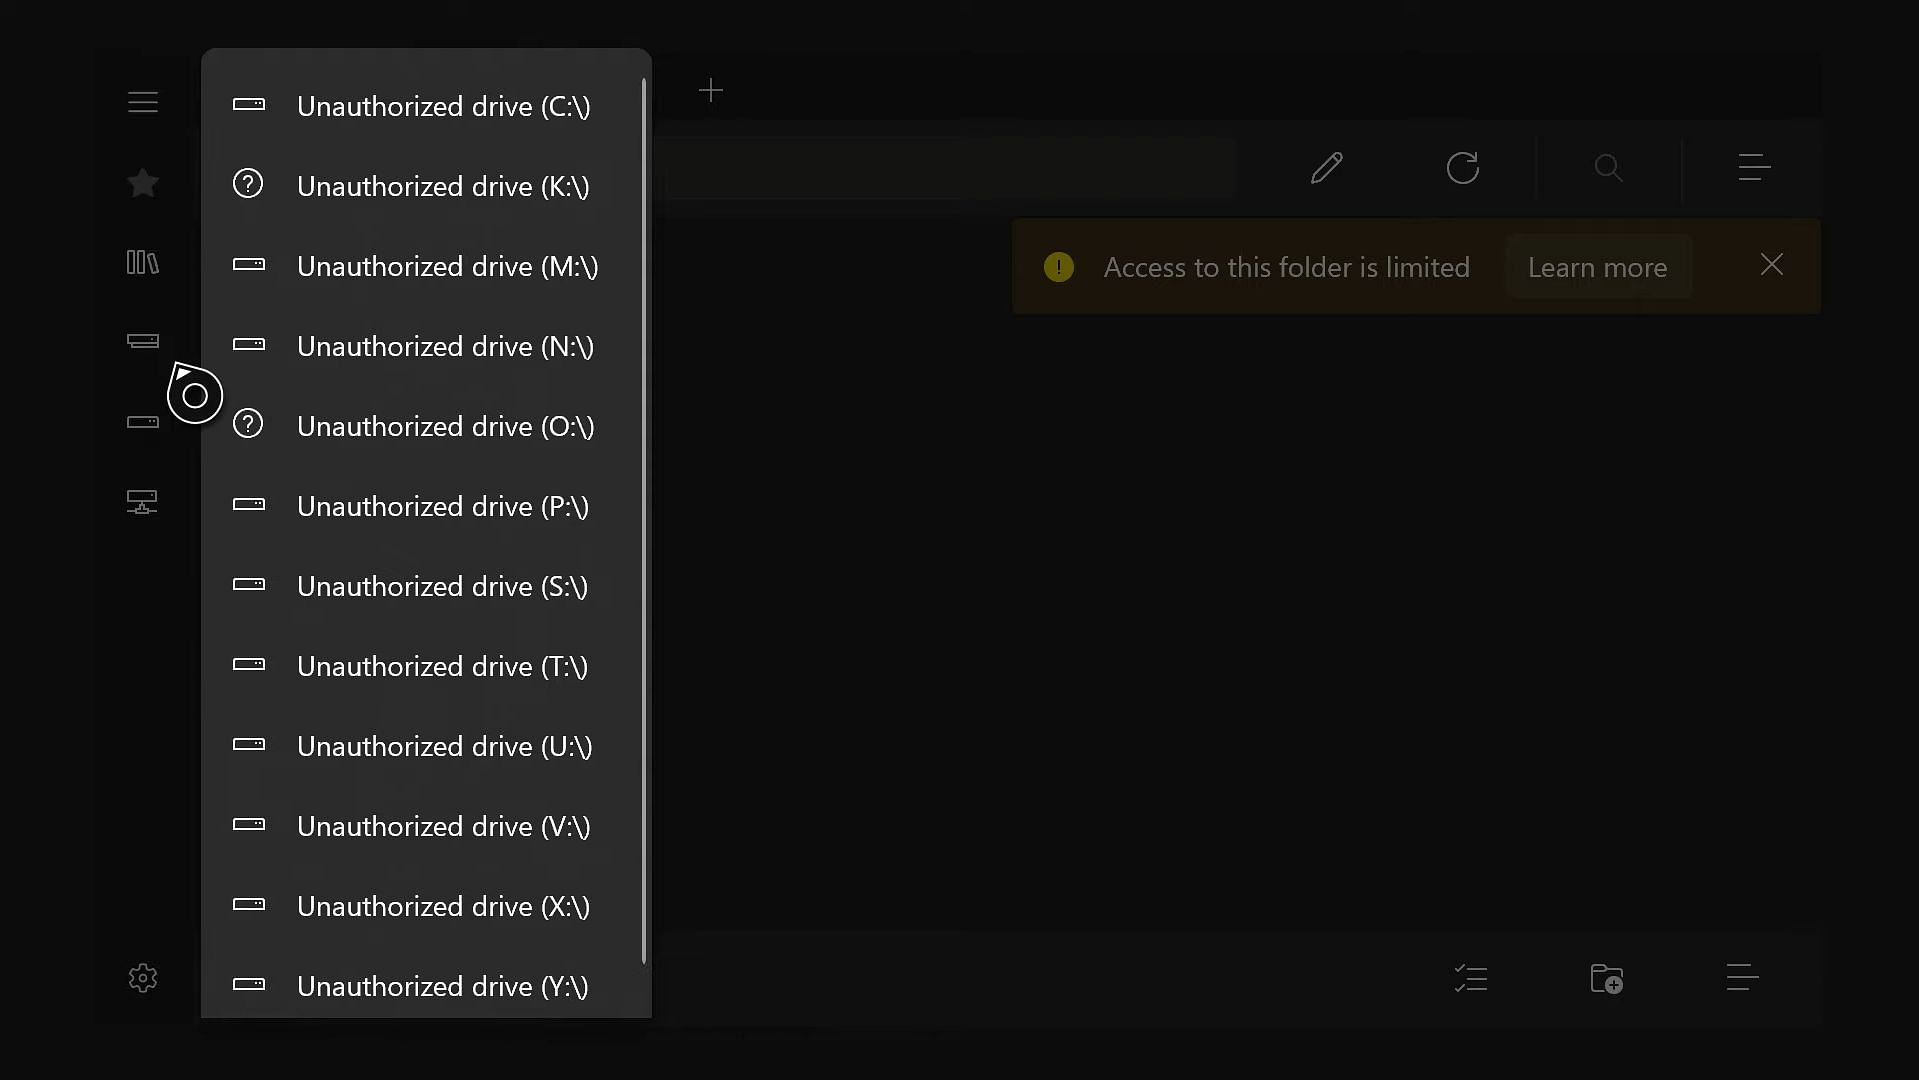 Where players can find the unauthorized drive list (Image via Adv File Explorer)